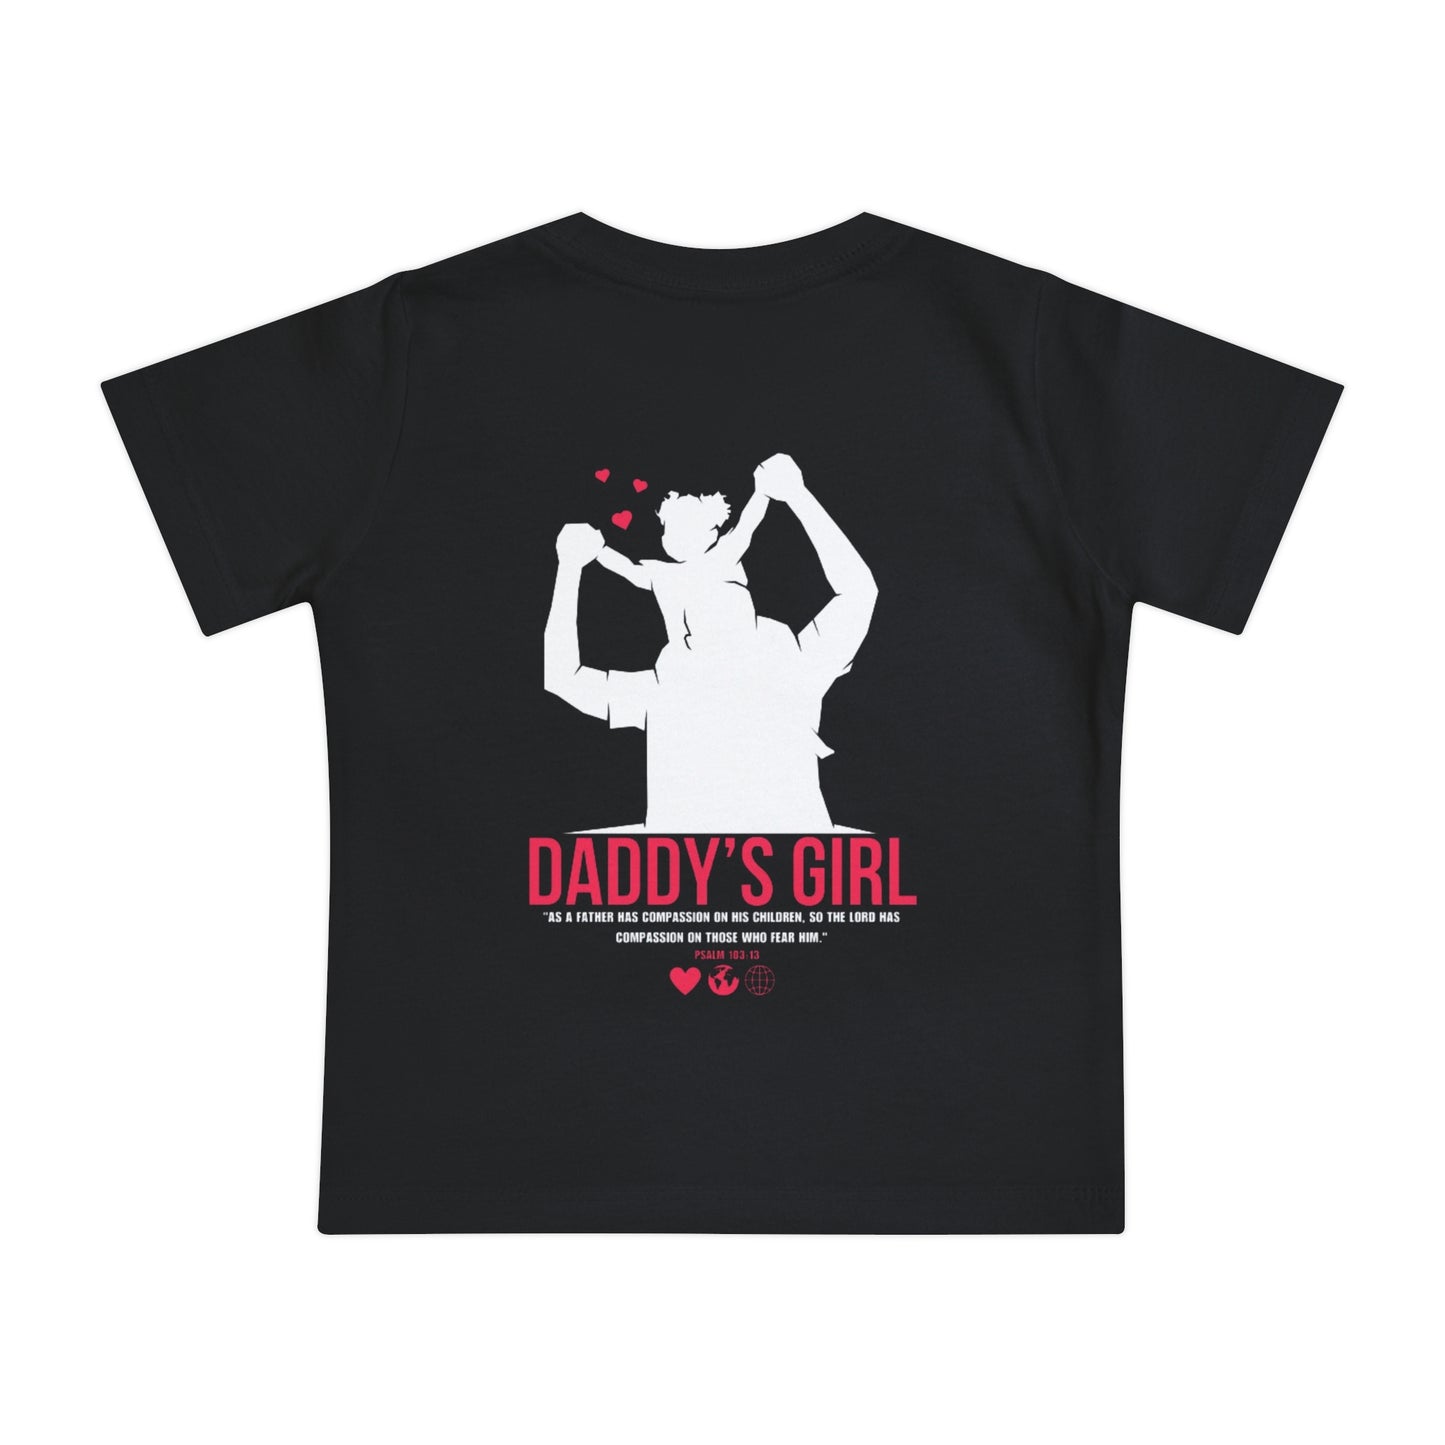 Daddy Girls's T-Shirt For Baby